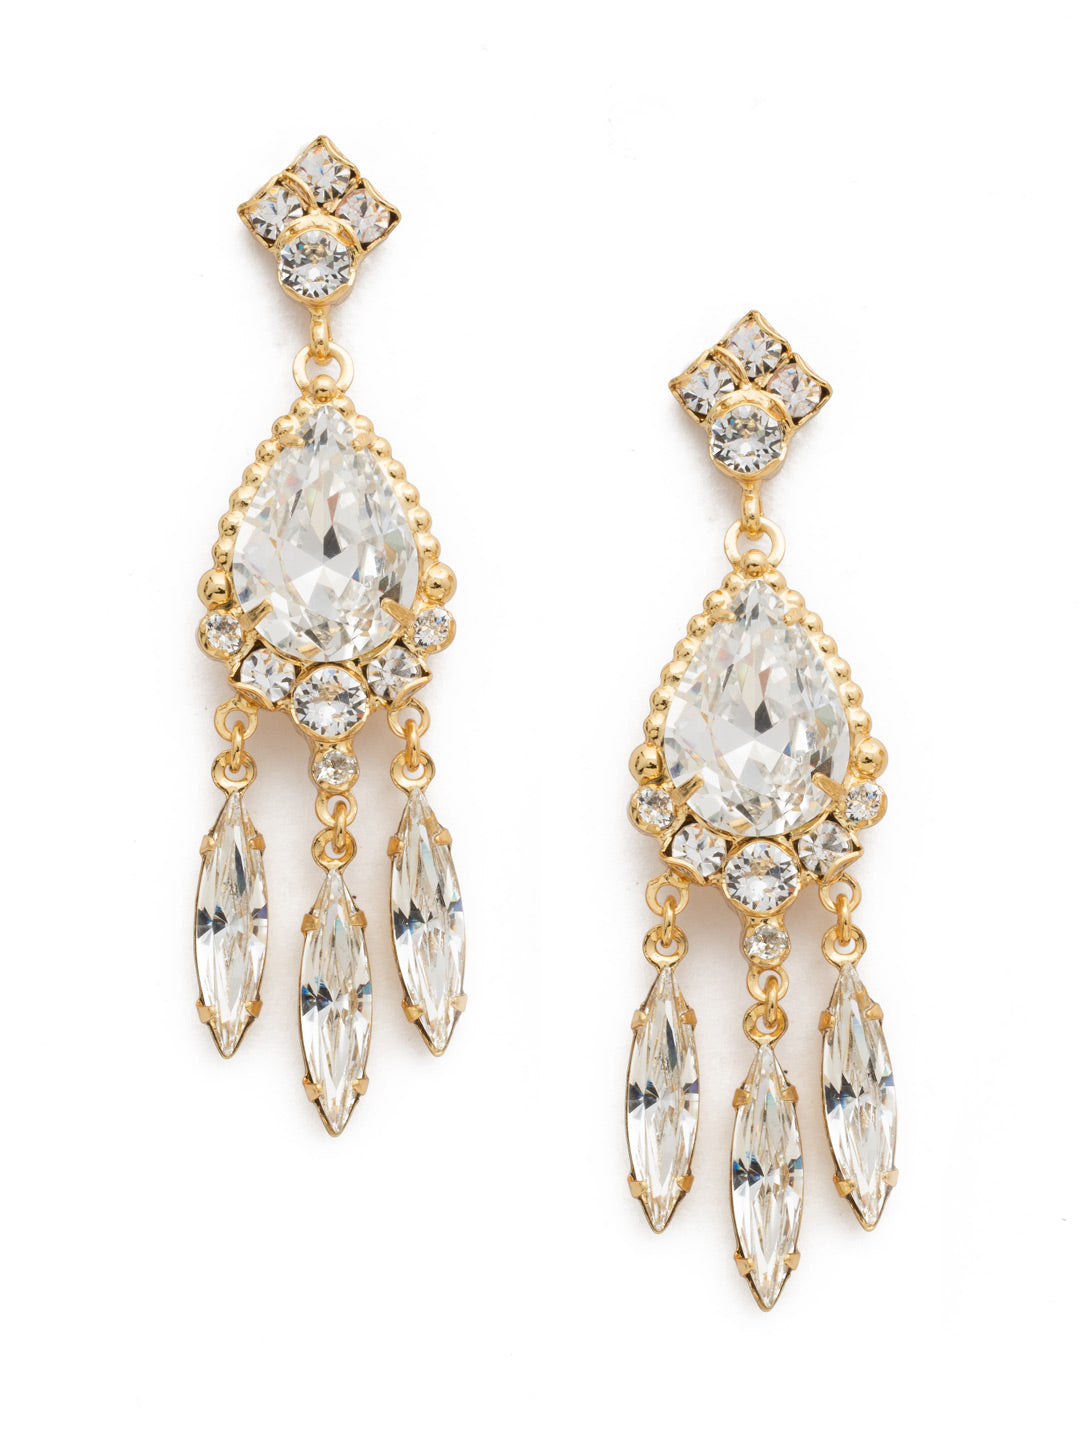 Primrose Earring - EDQ34BGCRY - <p>Our take on the tassel trend, the primrose earring offers lots of movement with three dangling marquise cut crystals hanging from a central pear-cut stone. From Sorrelli's Crystal collection in our Bright Gold-tone finish.</p>